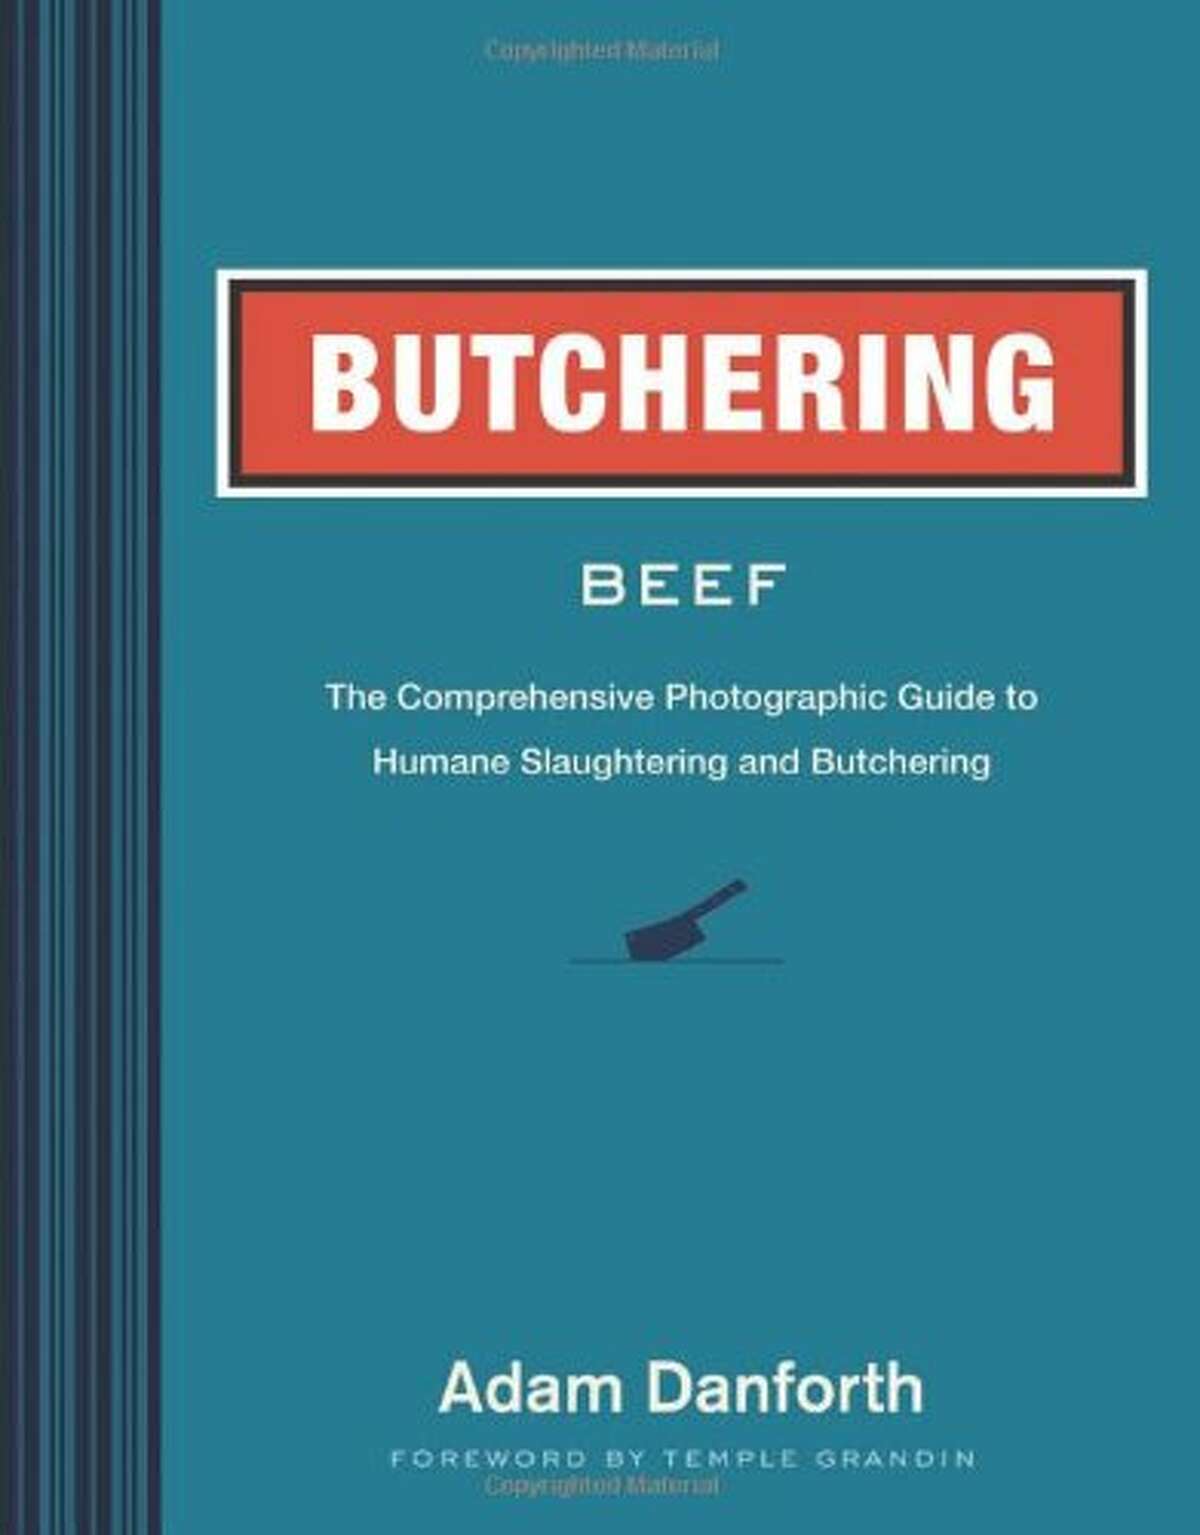 Adam Danforth is the author of Butchering: The Comprehensive Photographic Guide to Humane Slaughtering and Butchering,